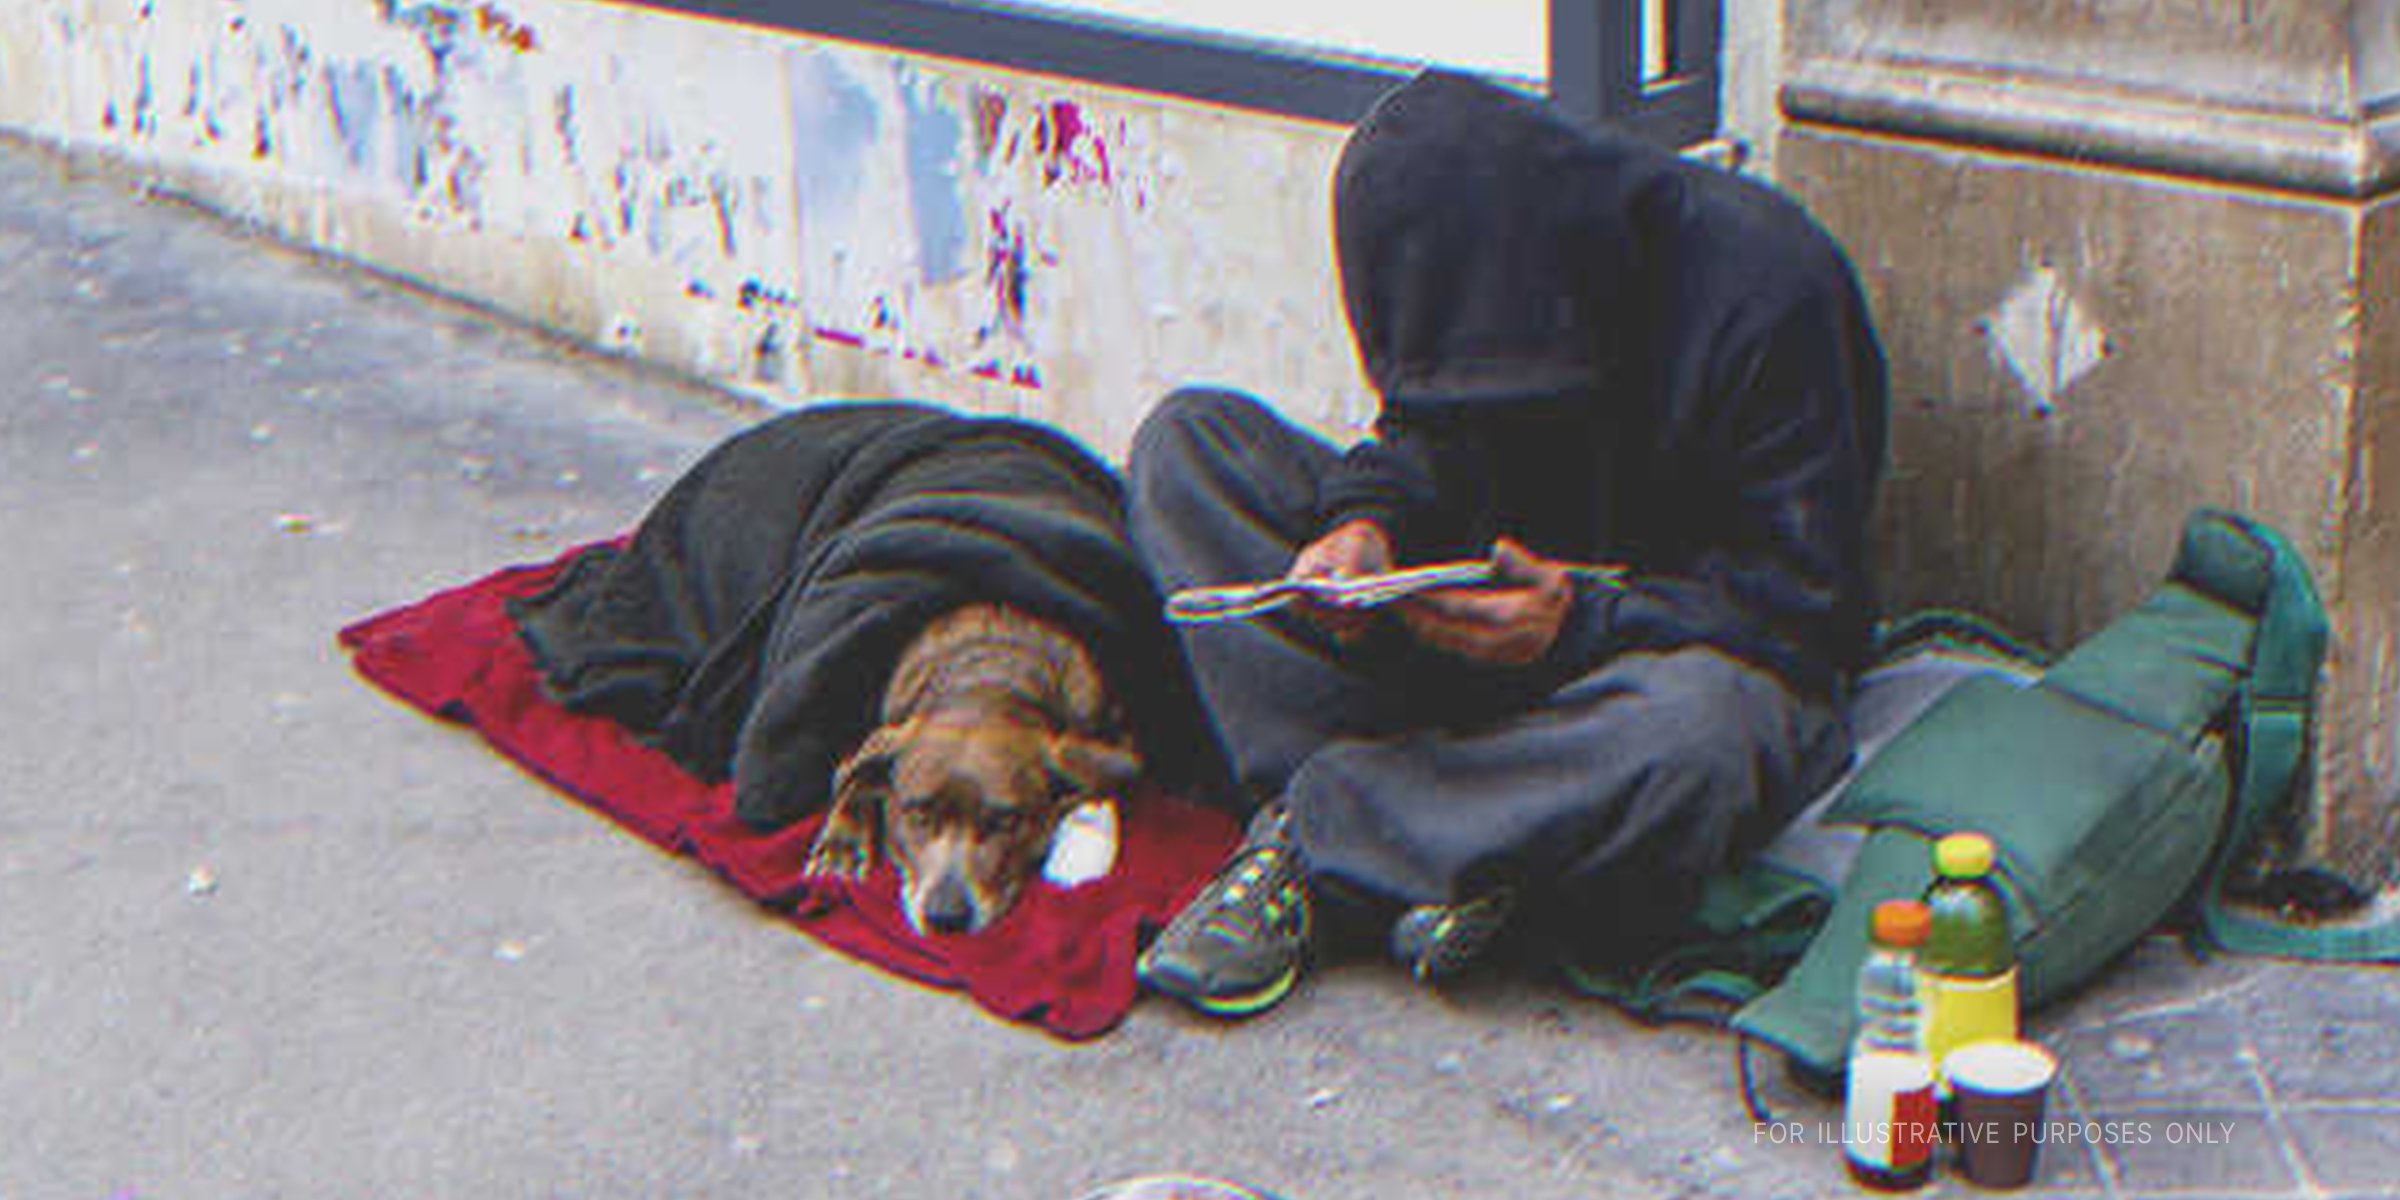 Homeless man sitting on the street with a dog | Source: Shutterstock